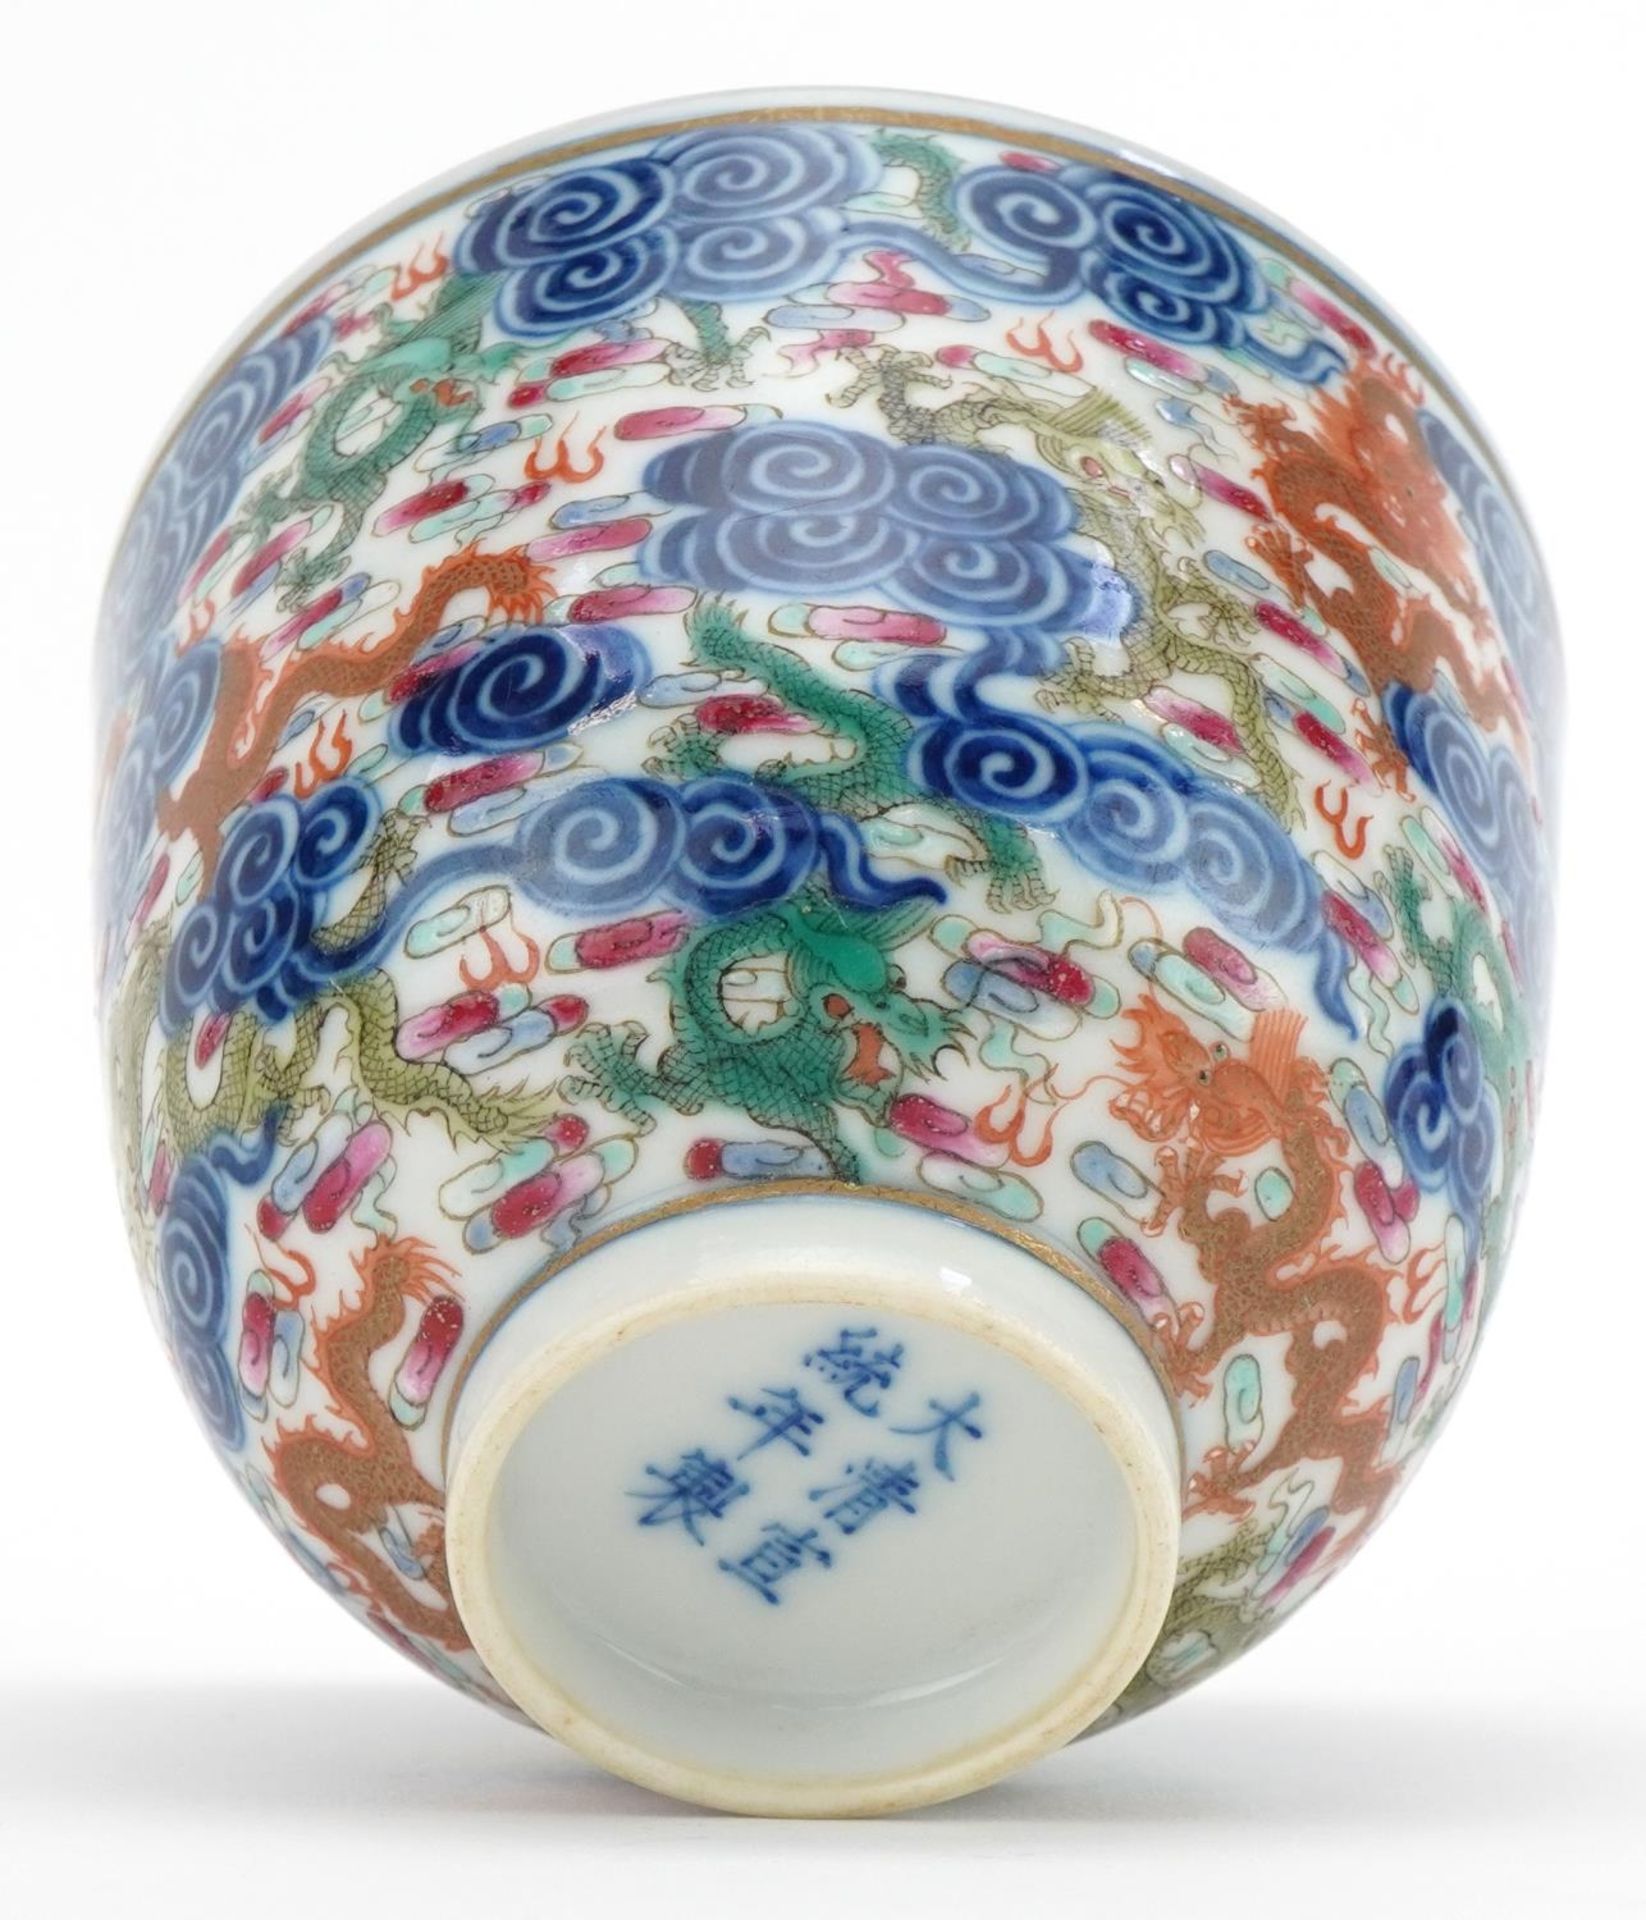 Chinese doucai porcelain tea bowl hand painted with dragons amongst clouds, six figure character - Image 6 of 7